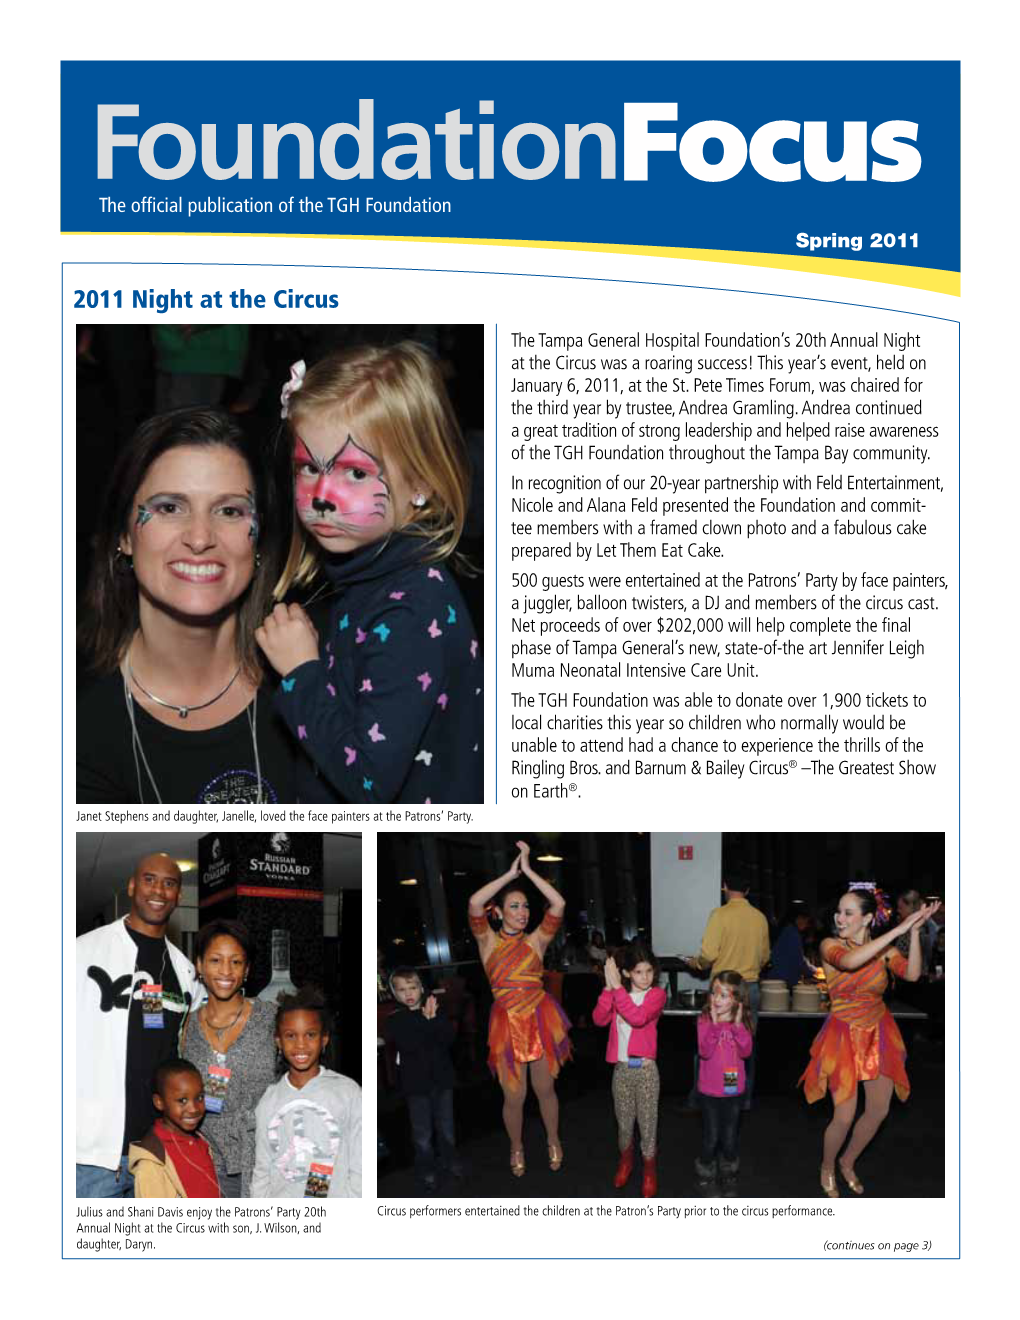 Foundationfocus the Official Publication of the TGH Foundation Spring 2011